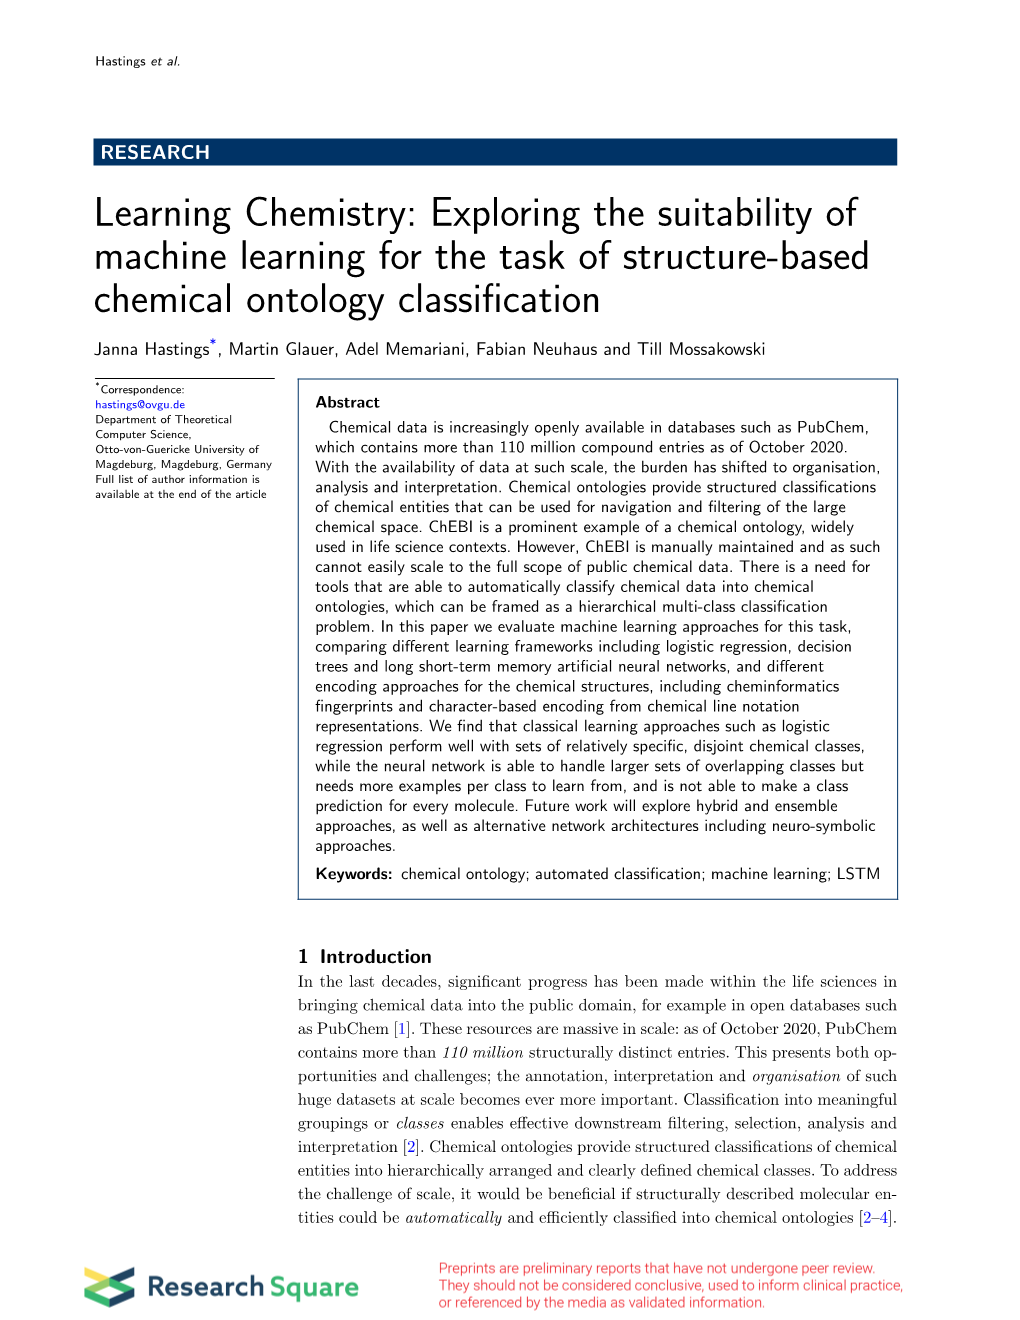 Learning Chemistry: Exploring the Suitability of Machine Learning for the Task of Structure-Based Chemical Ontology Classiﬁcation